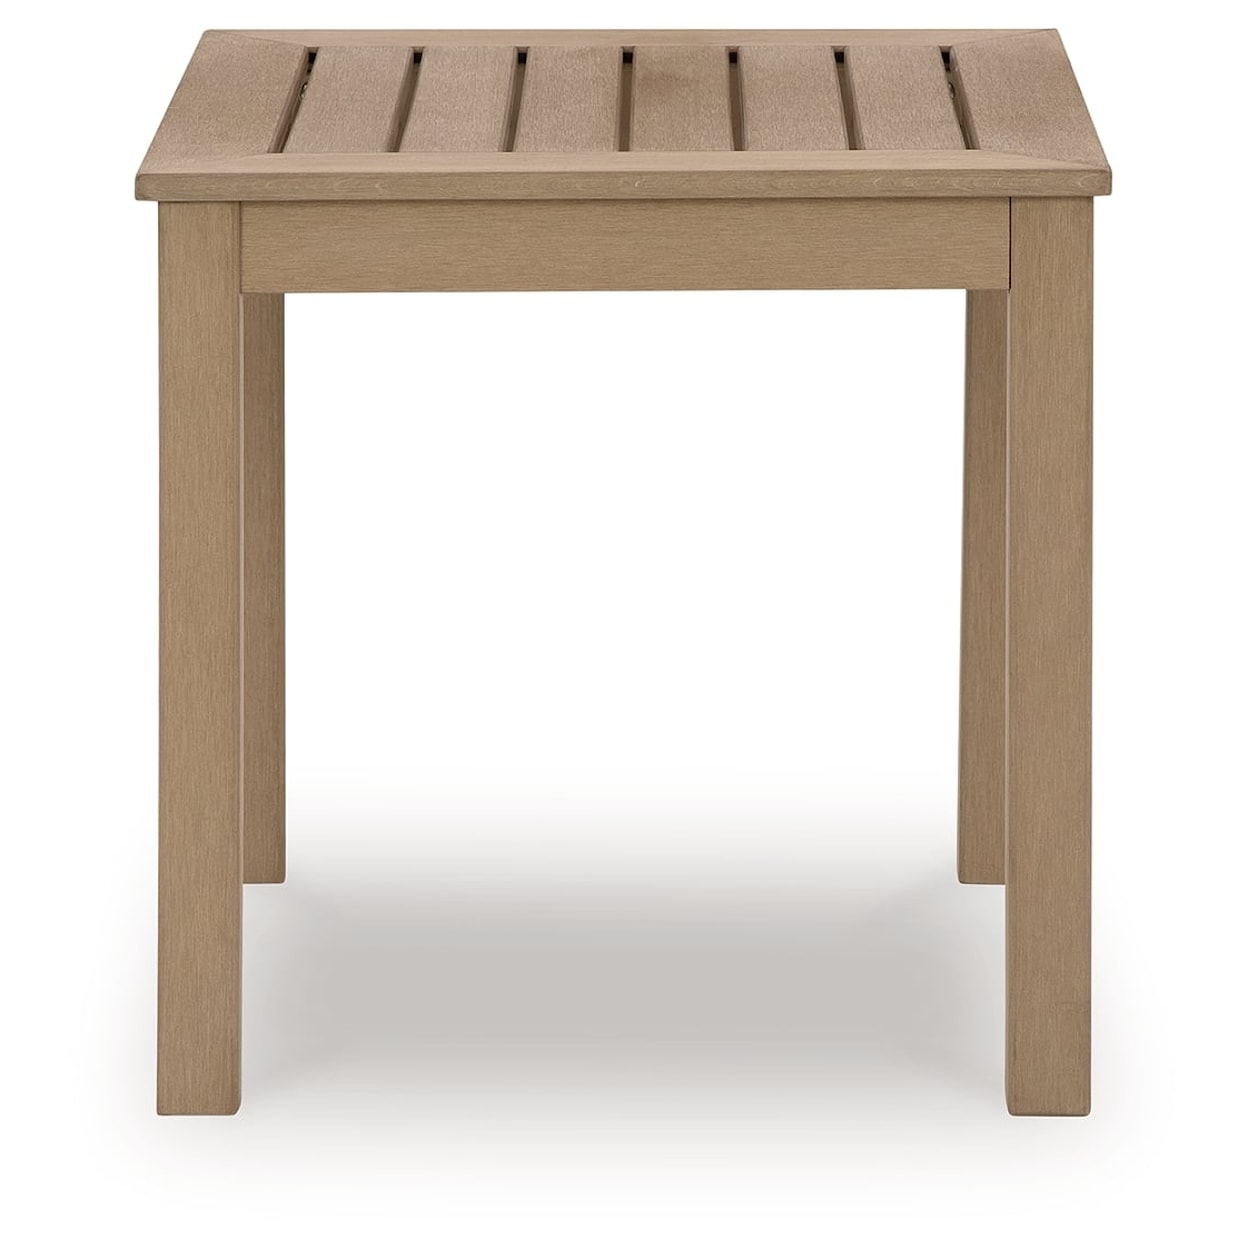 Benchcraft Hallow Creek Outdoor End Table